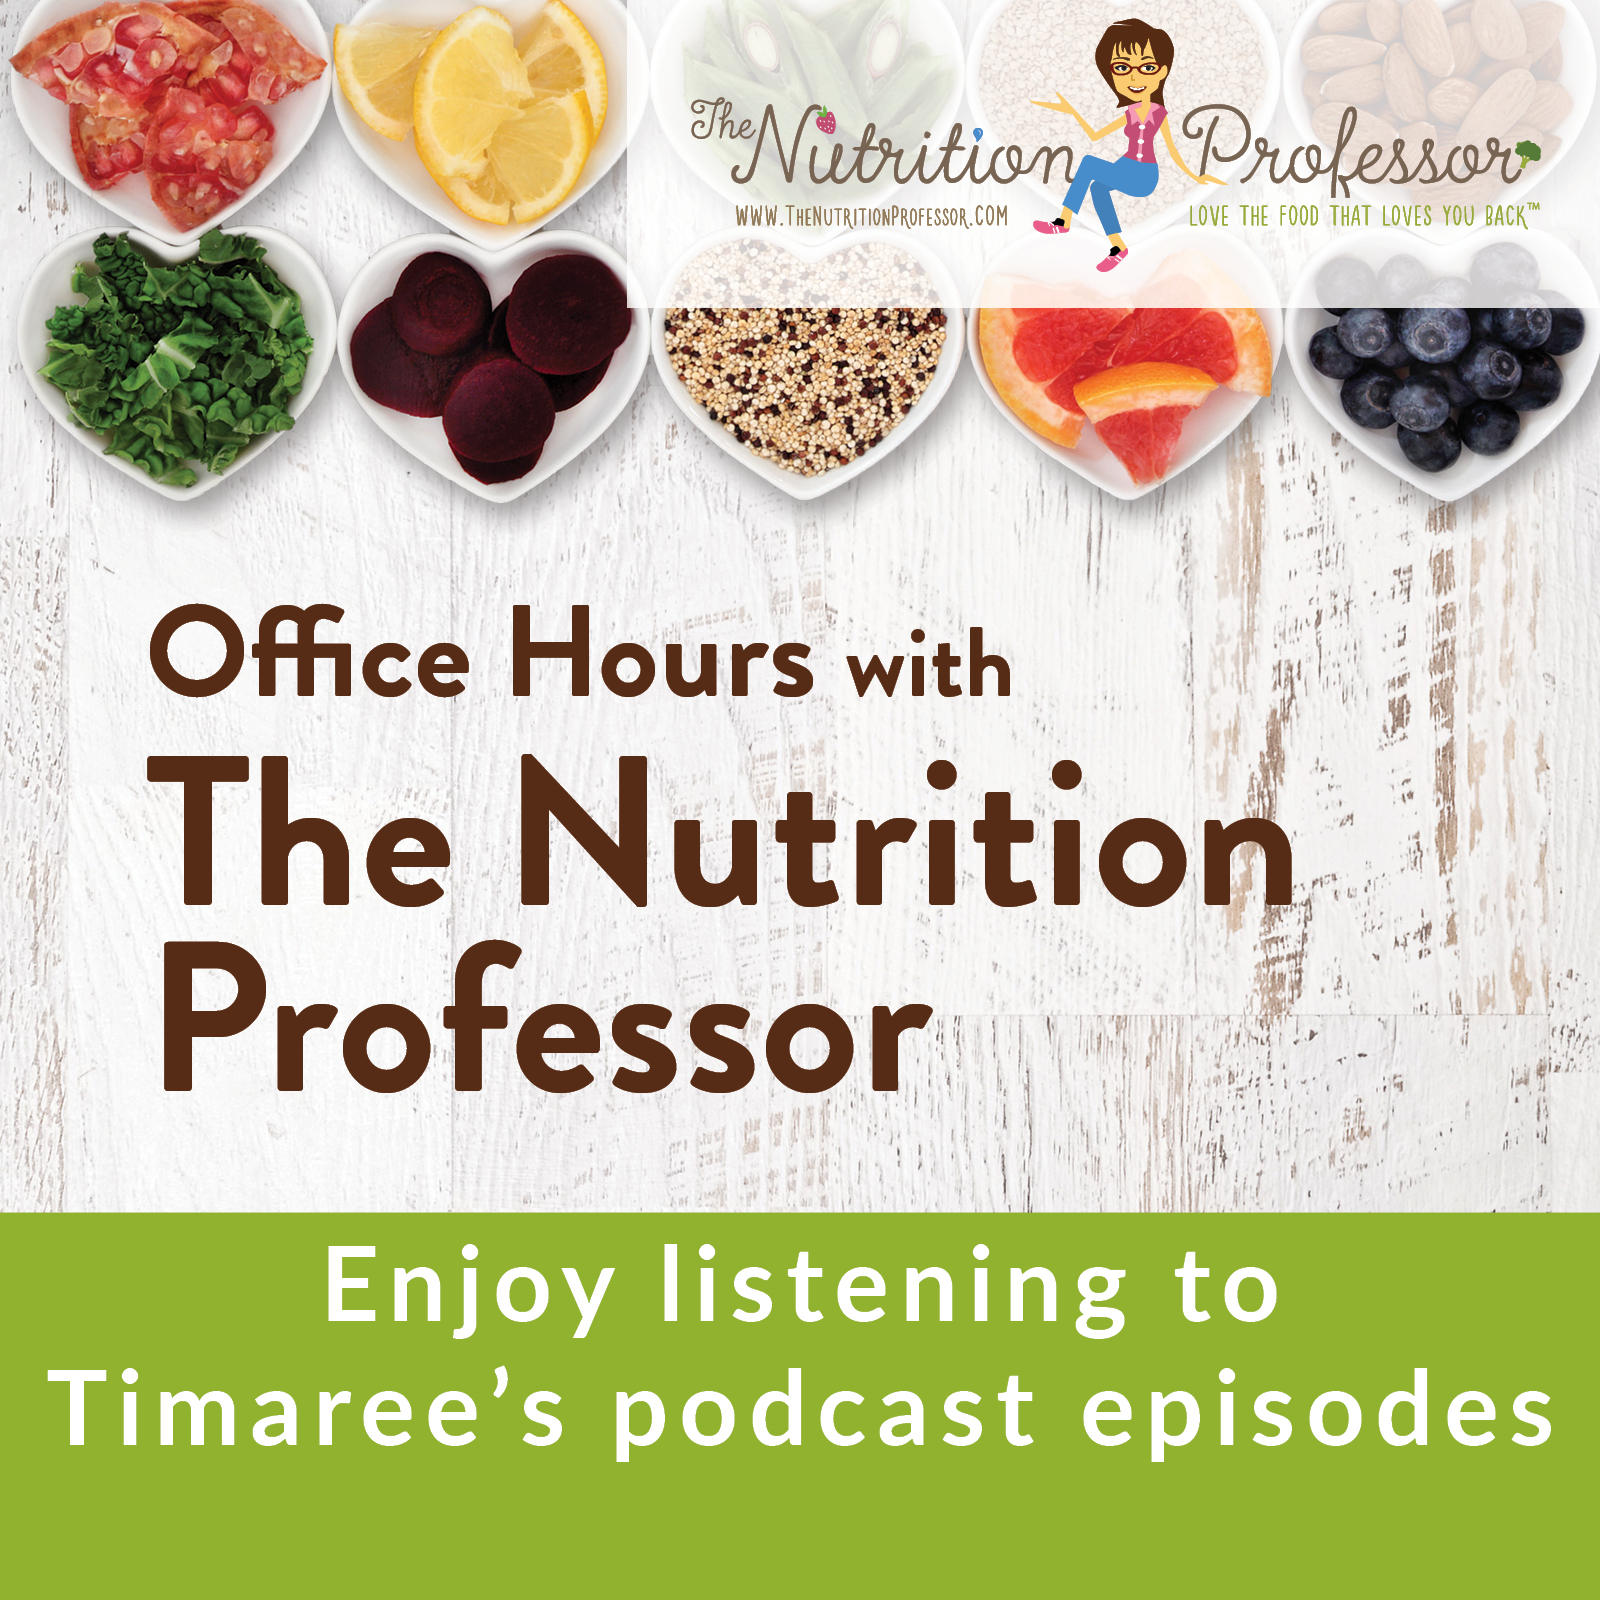 My own podcast is available: Office Hours with The Nutrition Professor!